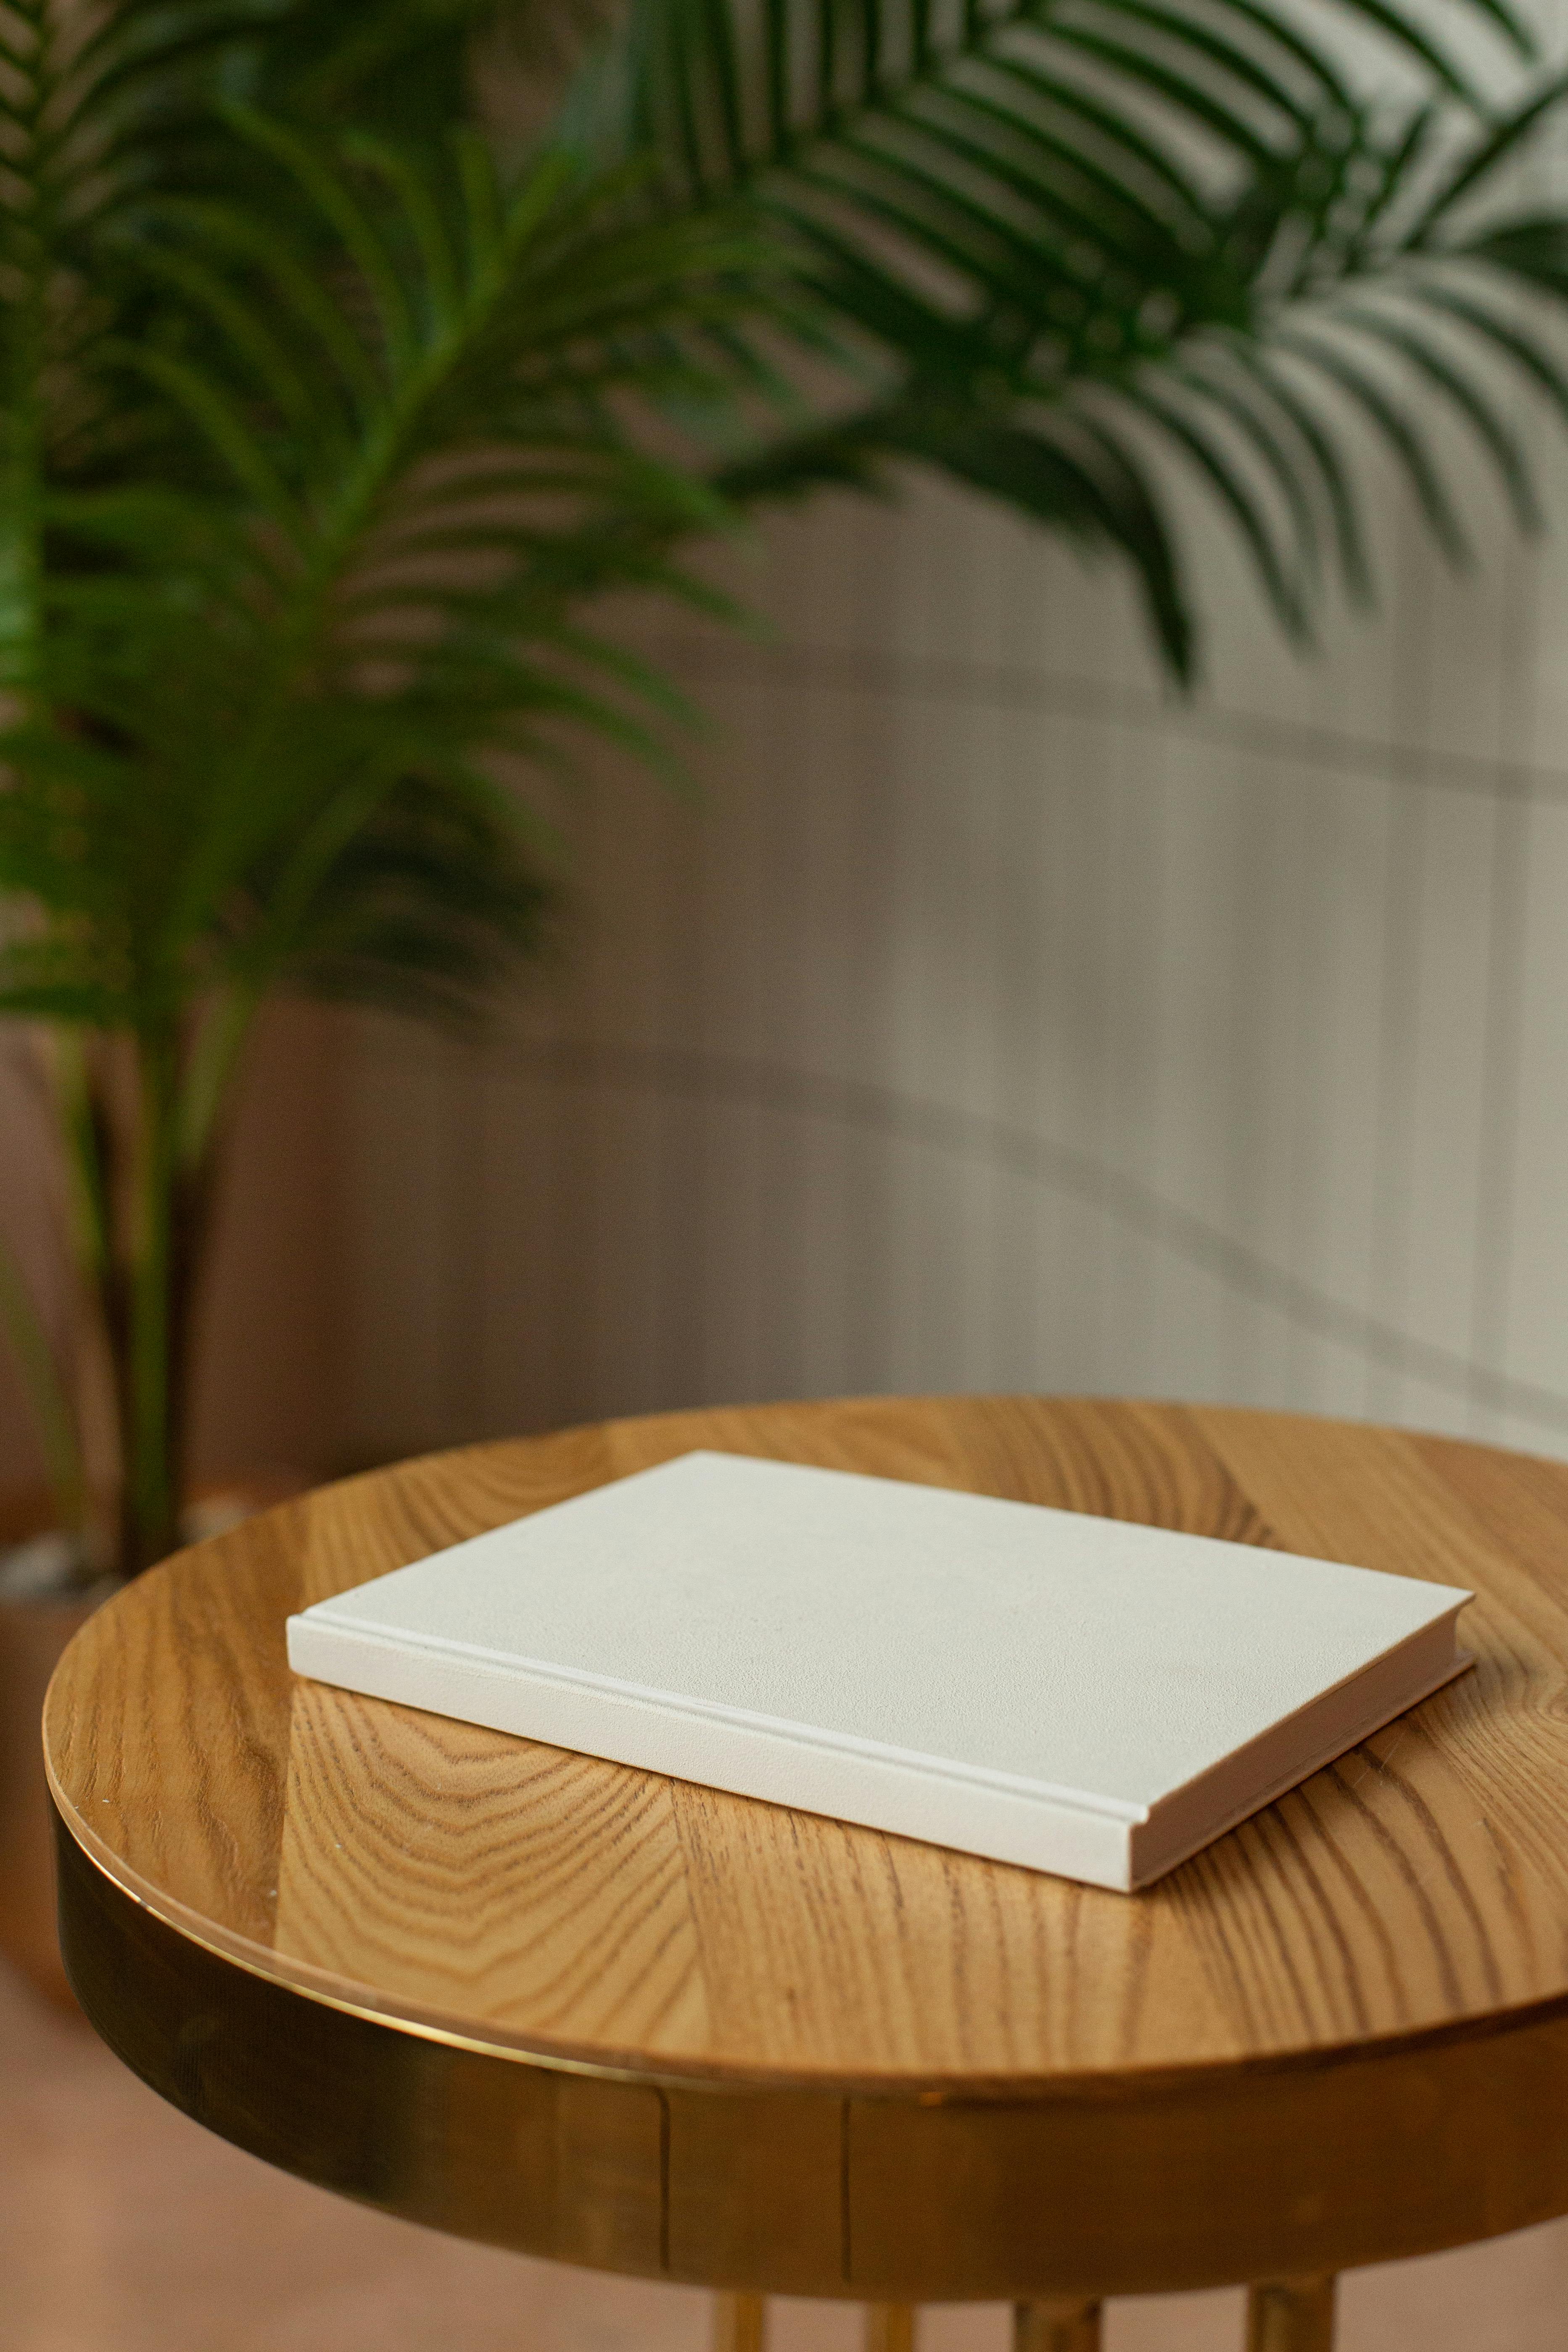 wooden table with empty hardcovered book